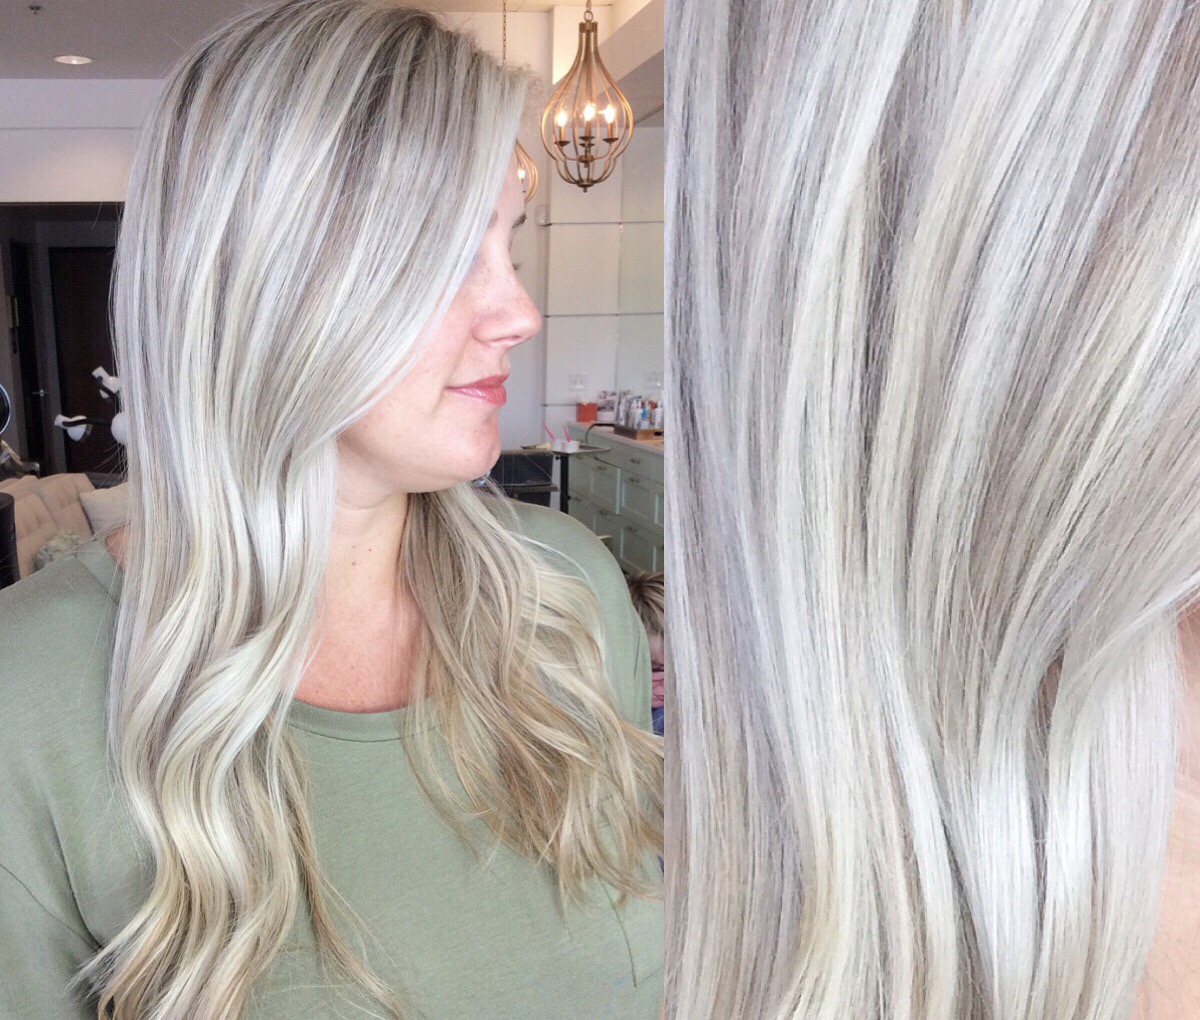 What To Ask Your Stylist For To Get The Color You Want